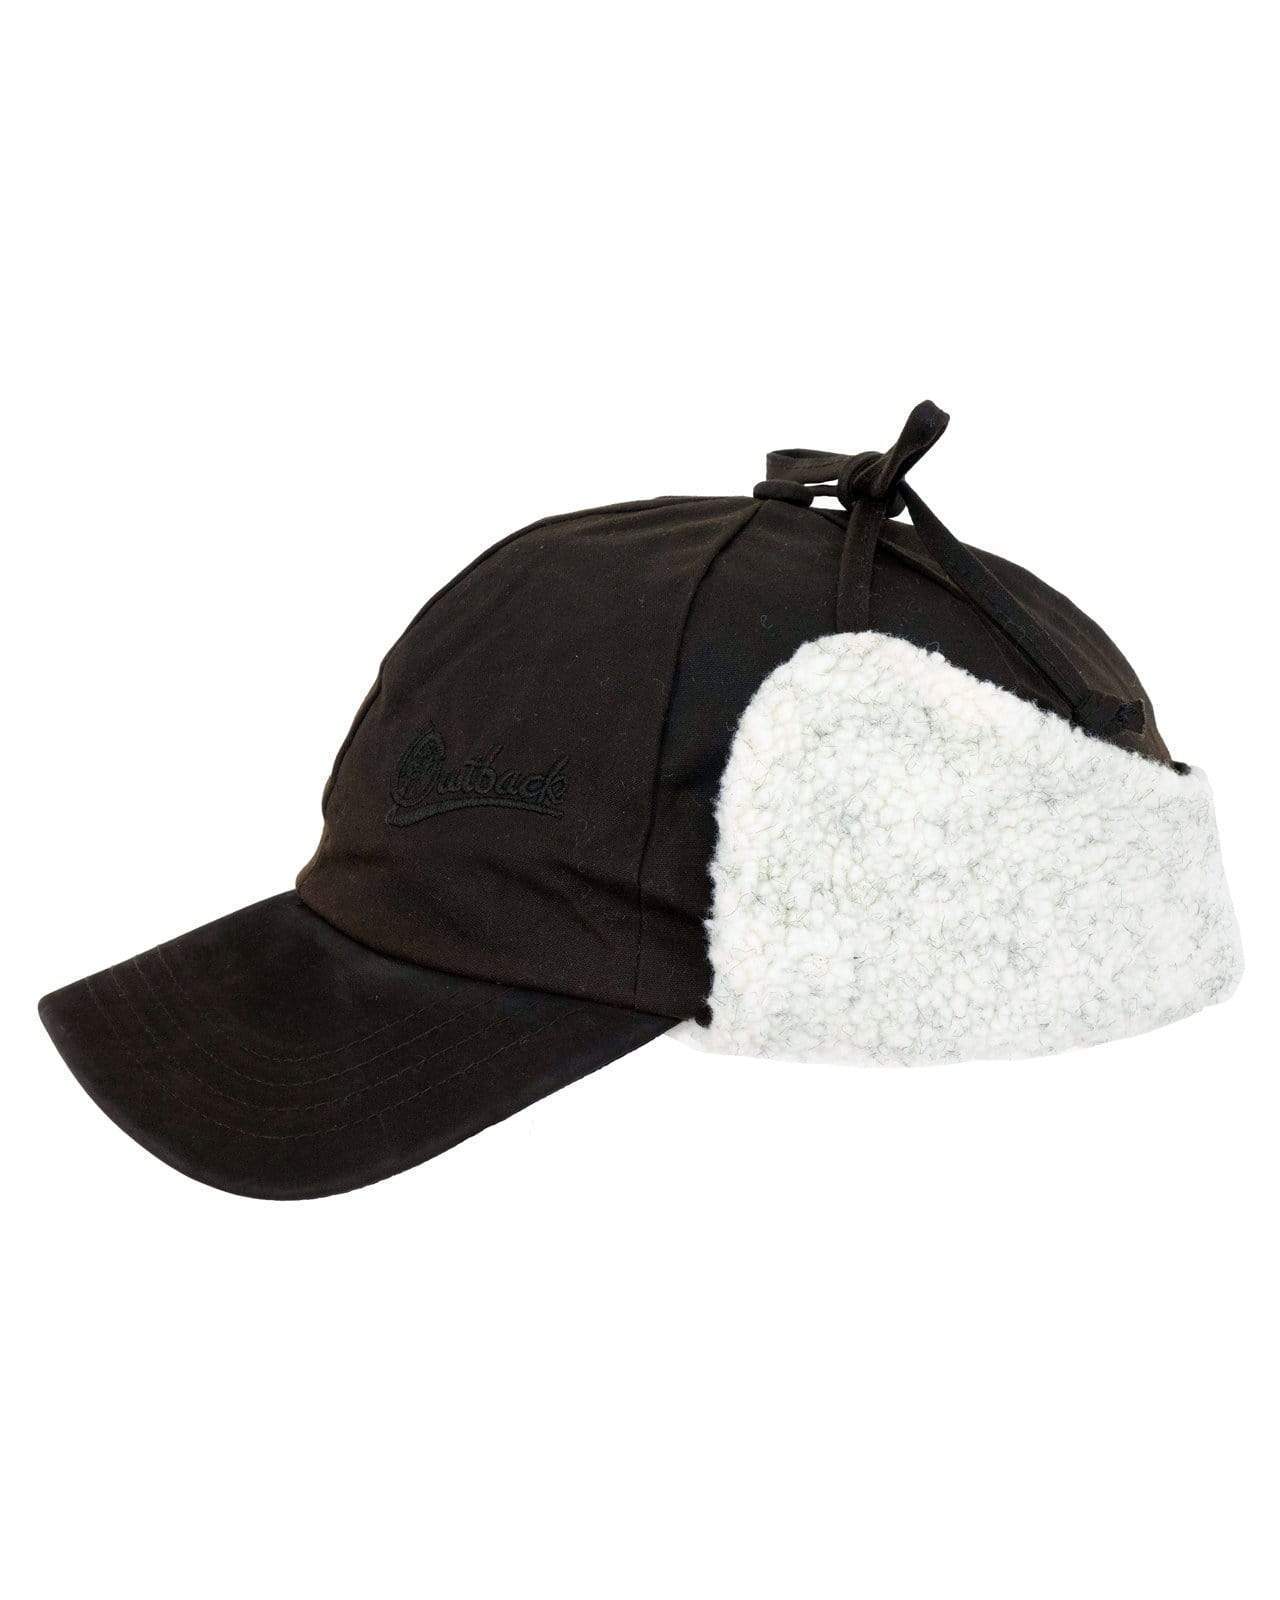 Outback Trading Company McKinley Cap Hats